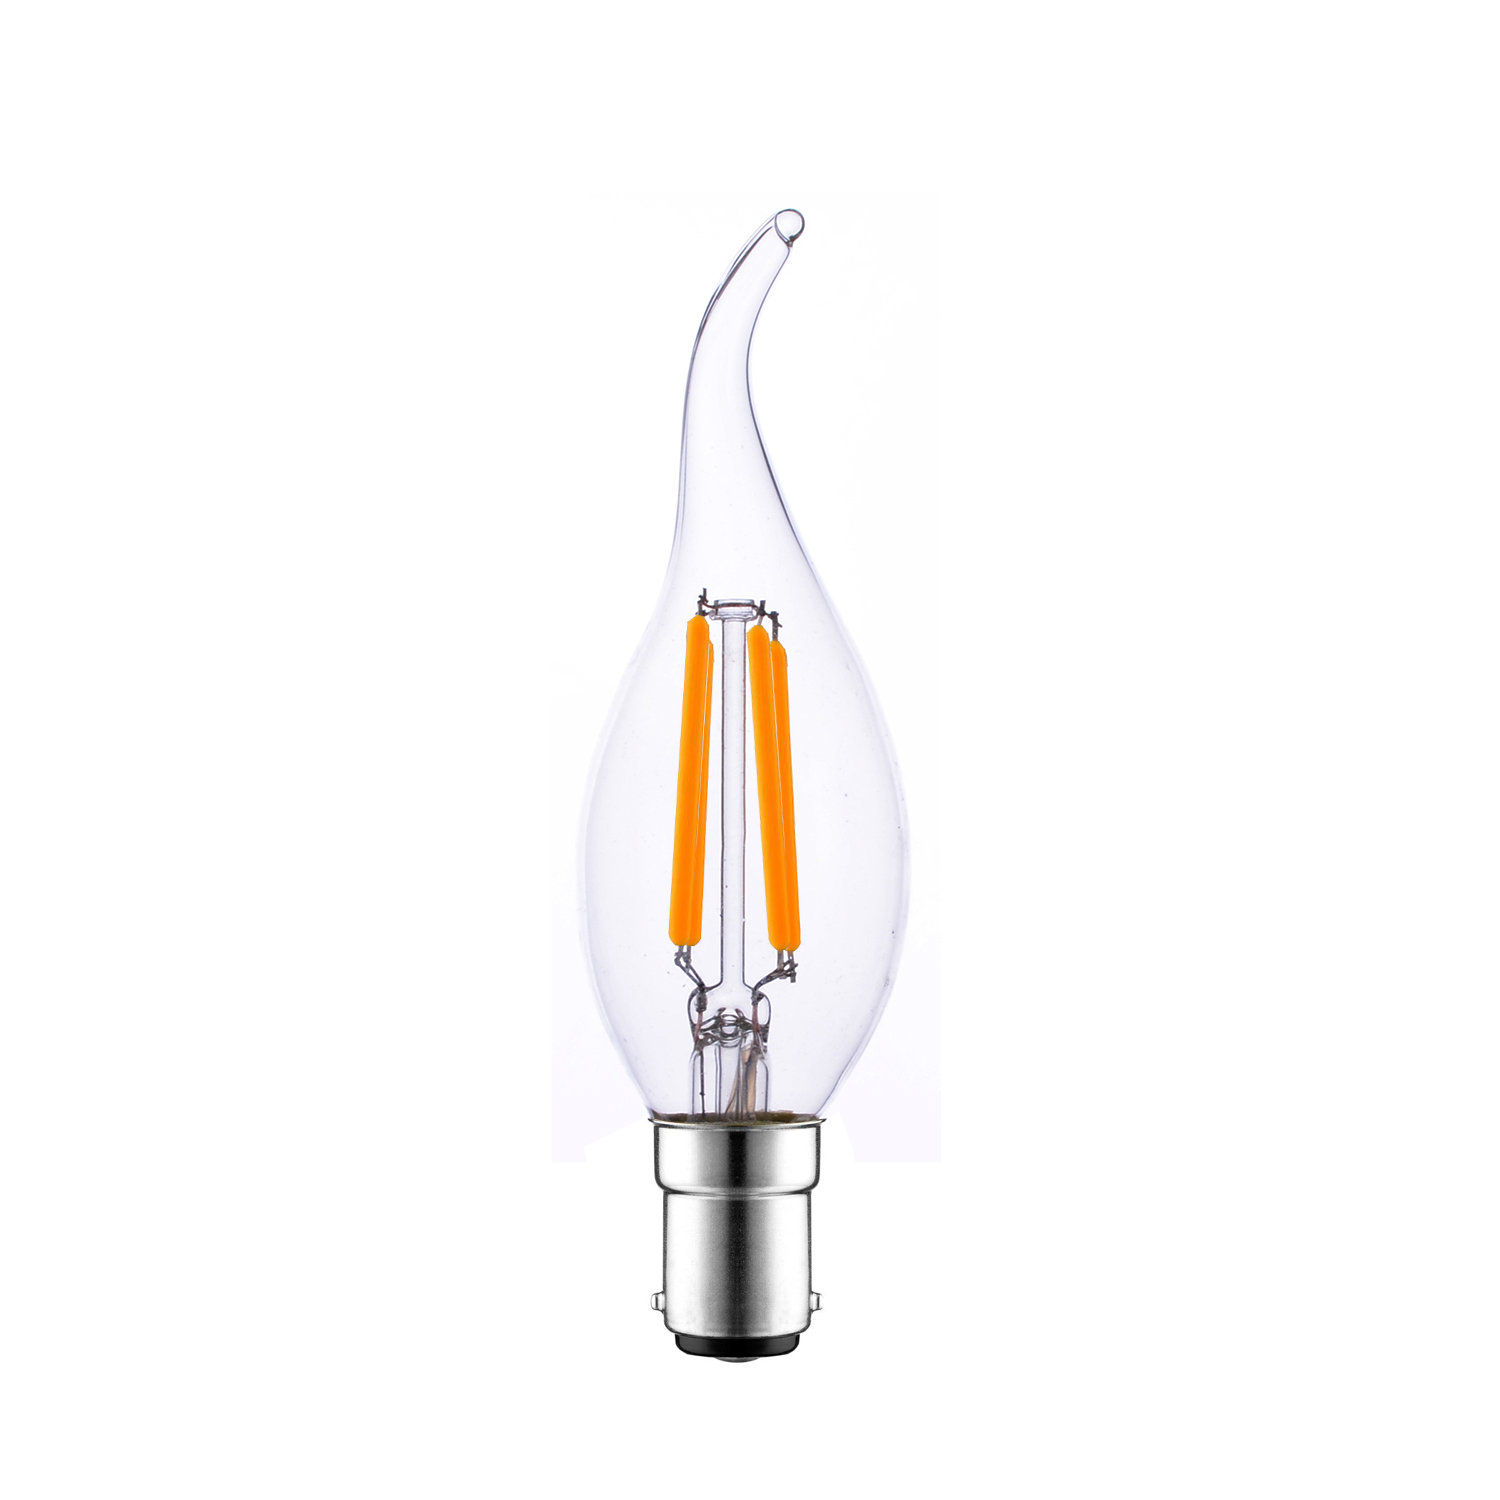 B15 Dimmable LED candle bulb Filament